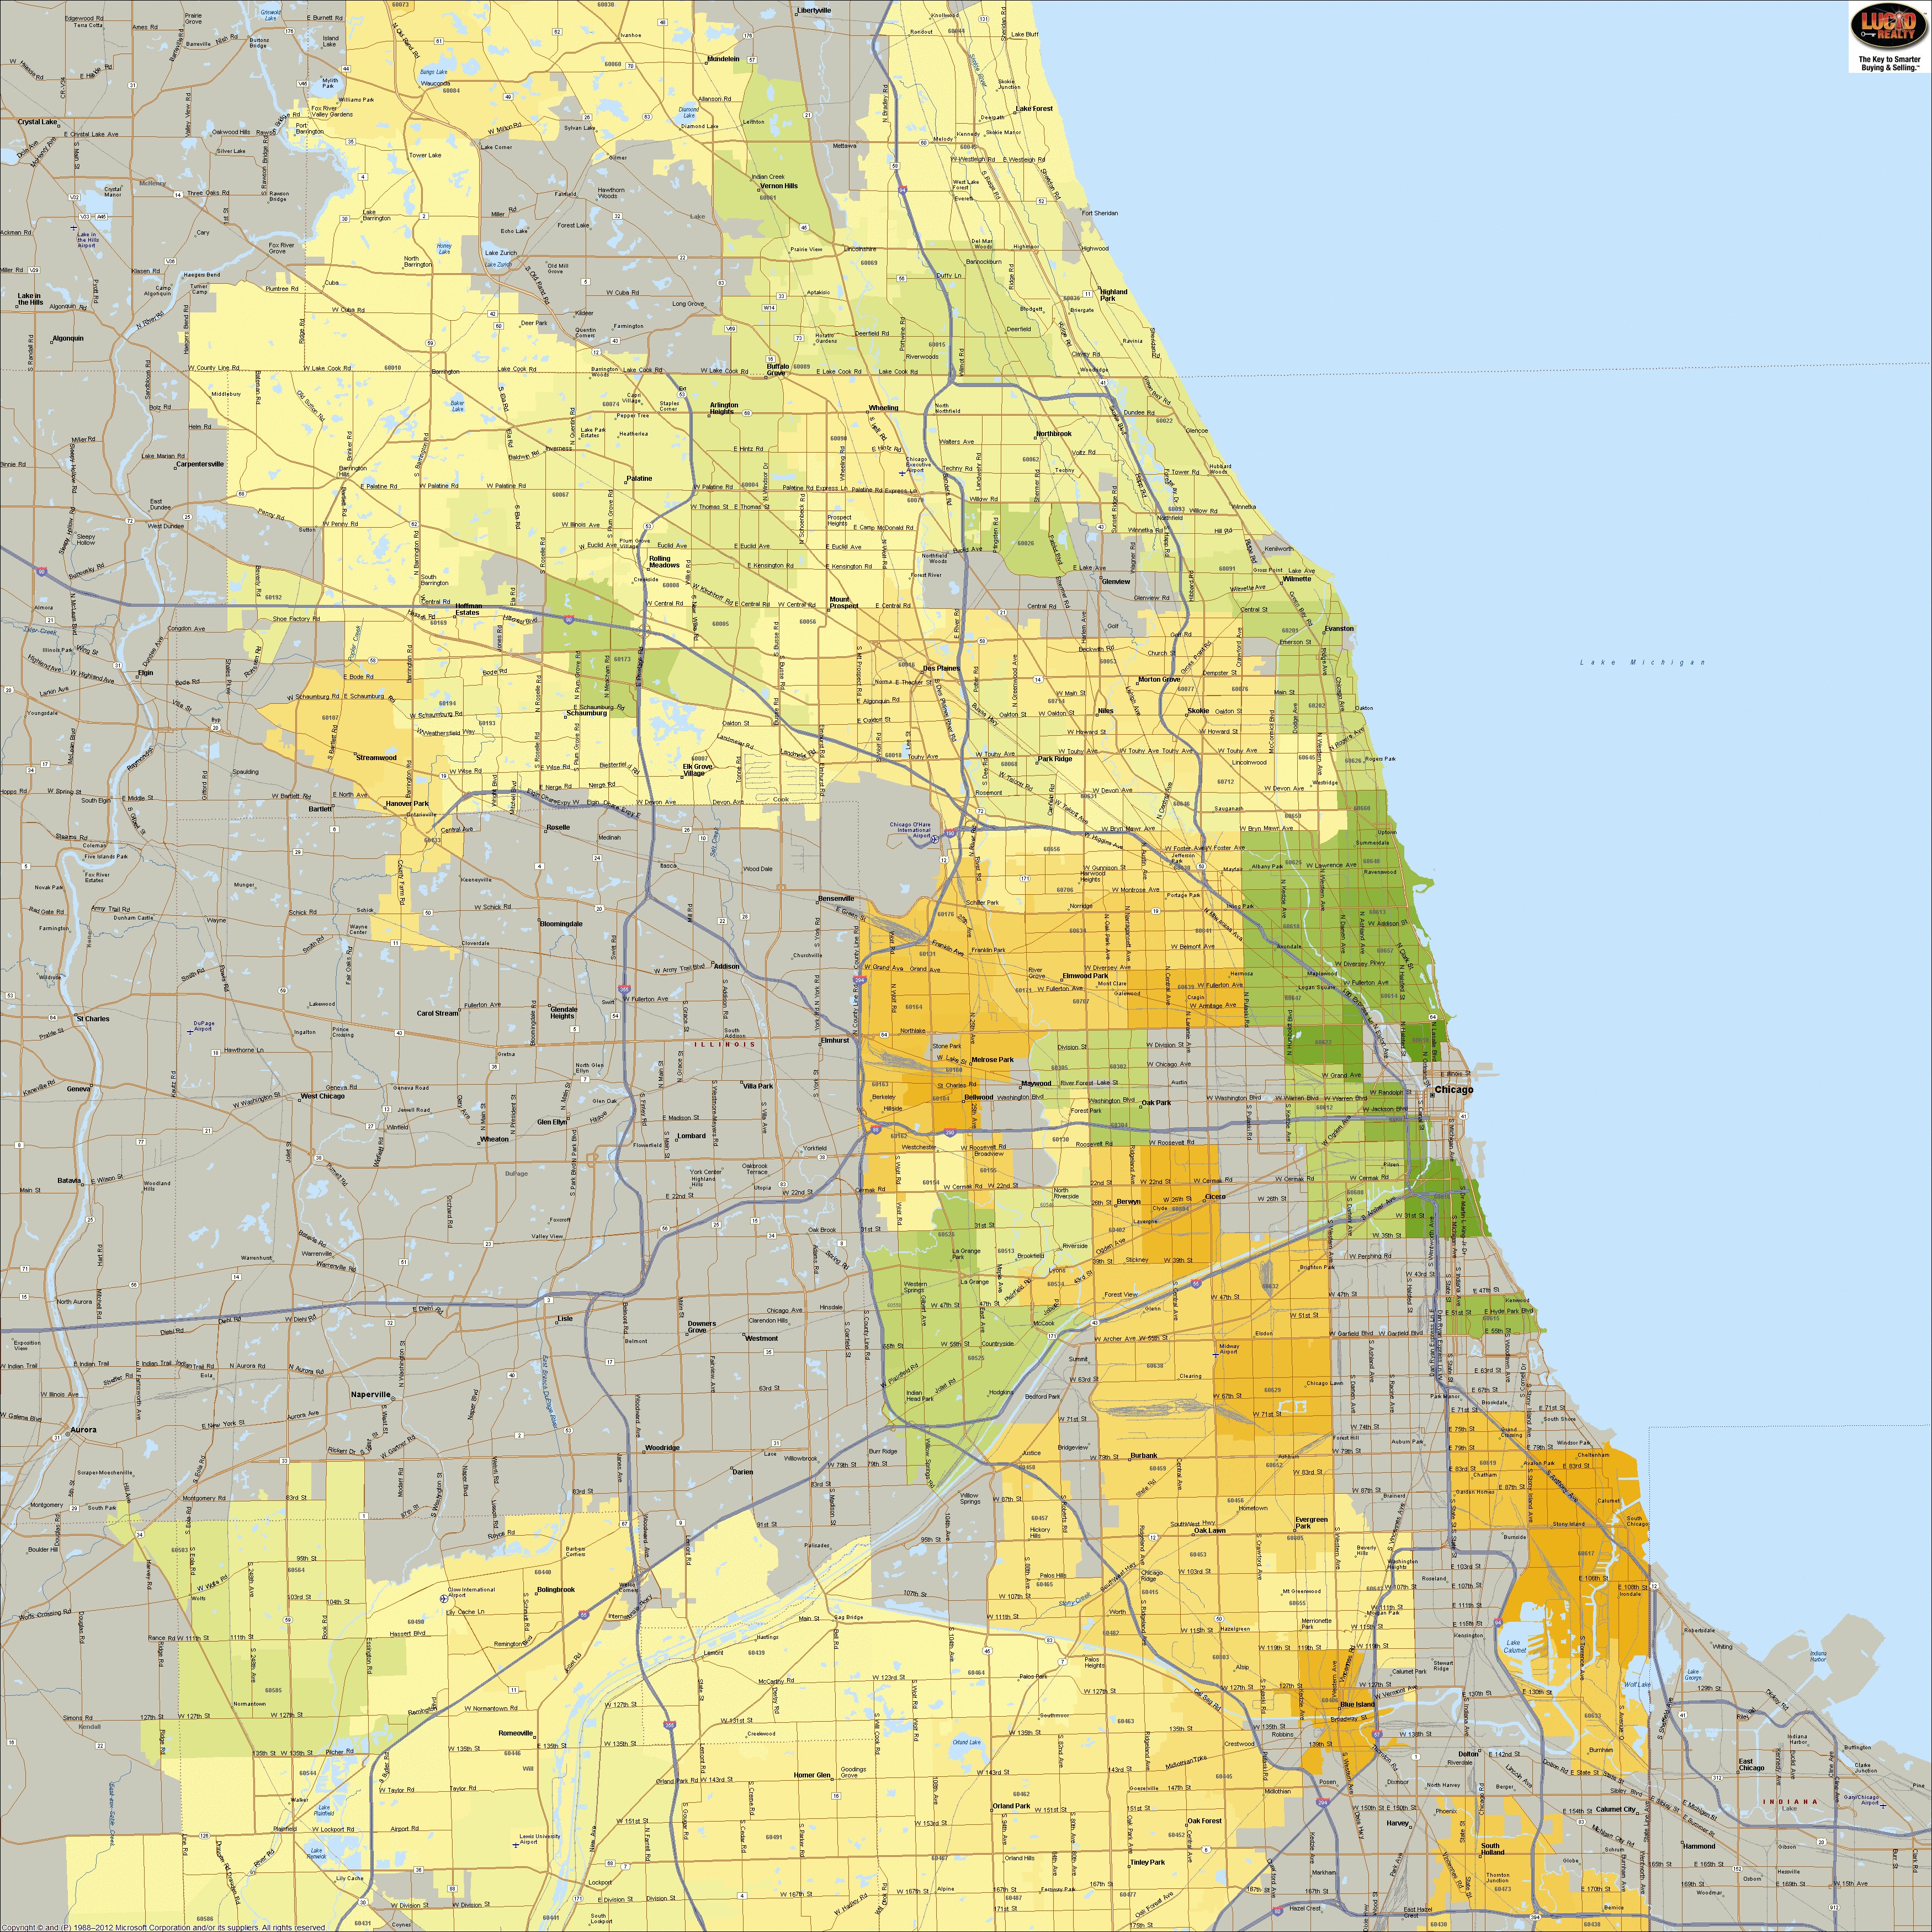 Chicago area price changes by zip code